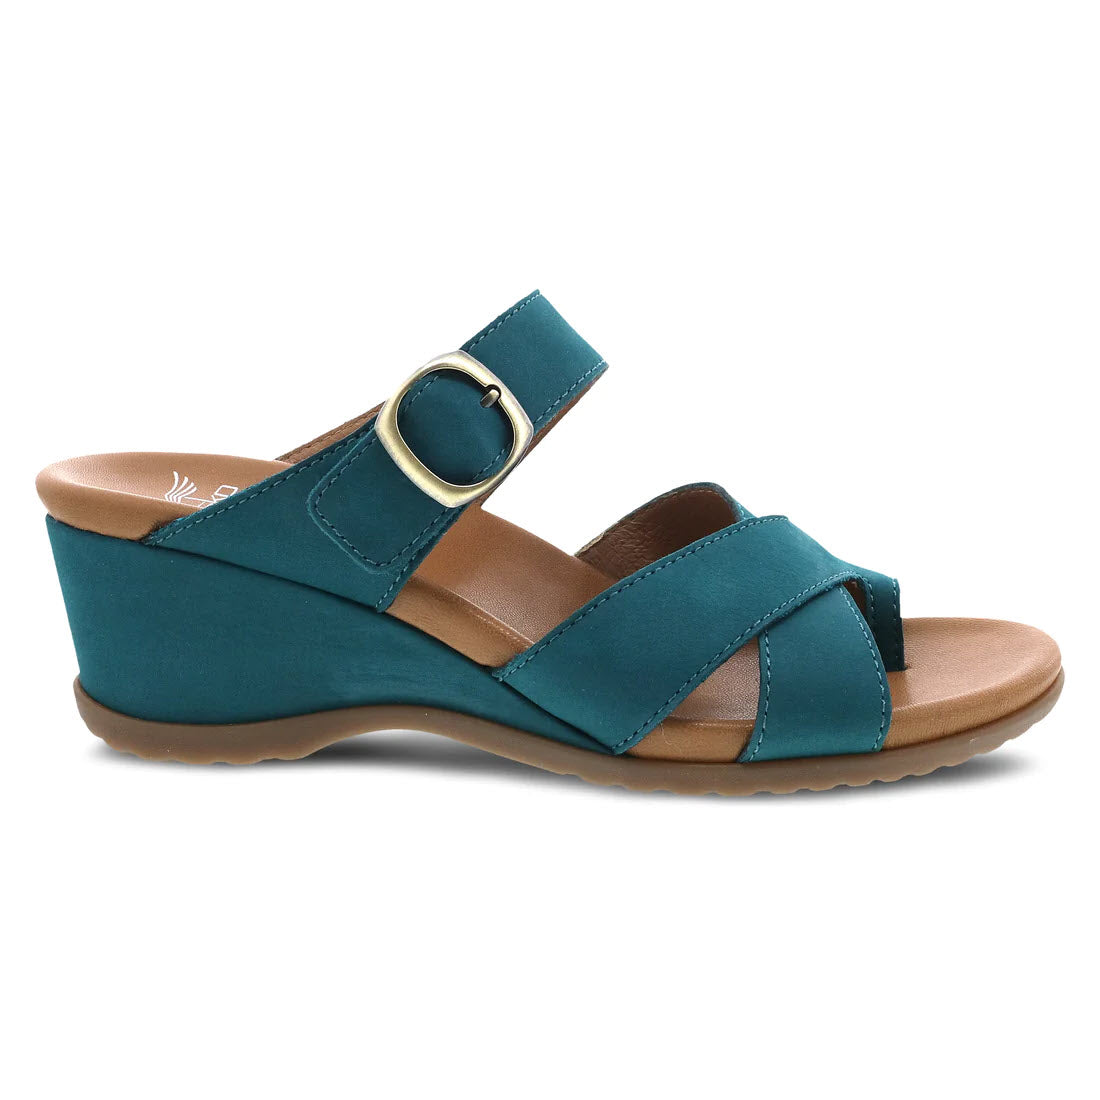 A Dansko Aubree teal nubuck wedge sandal with crisscross straps and a circular buckle on a white background.